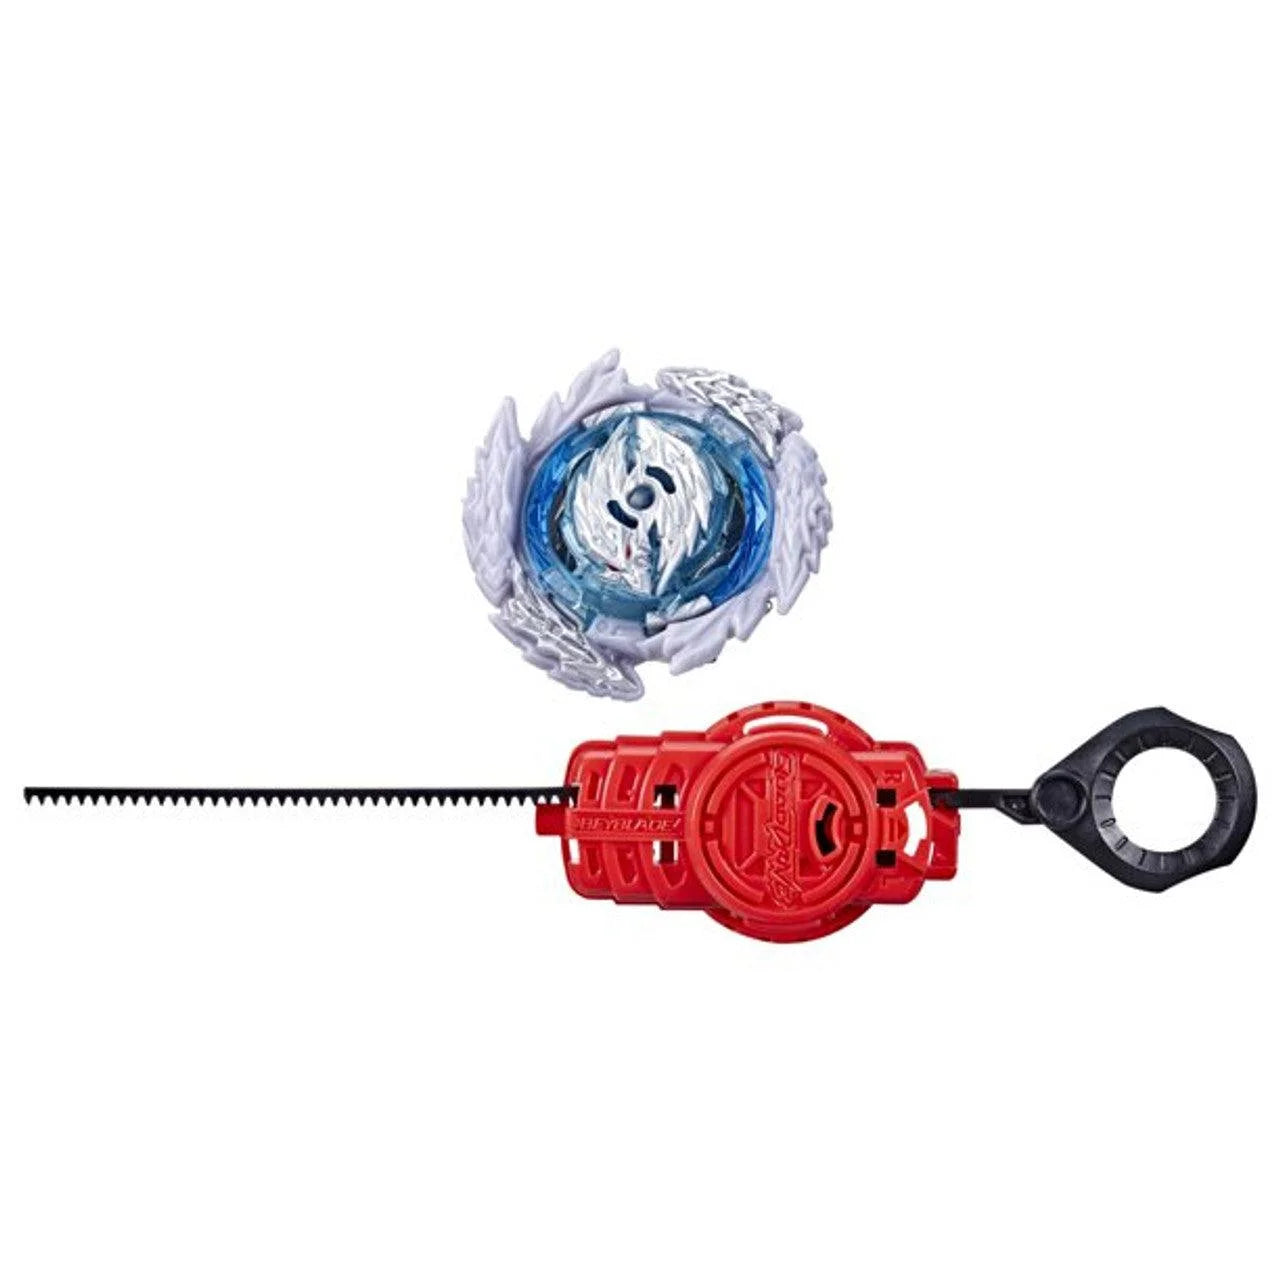 Beyblade and Launcher included in Hasbro Guilty Luinor L7